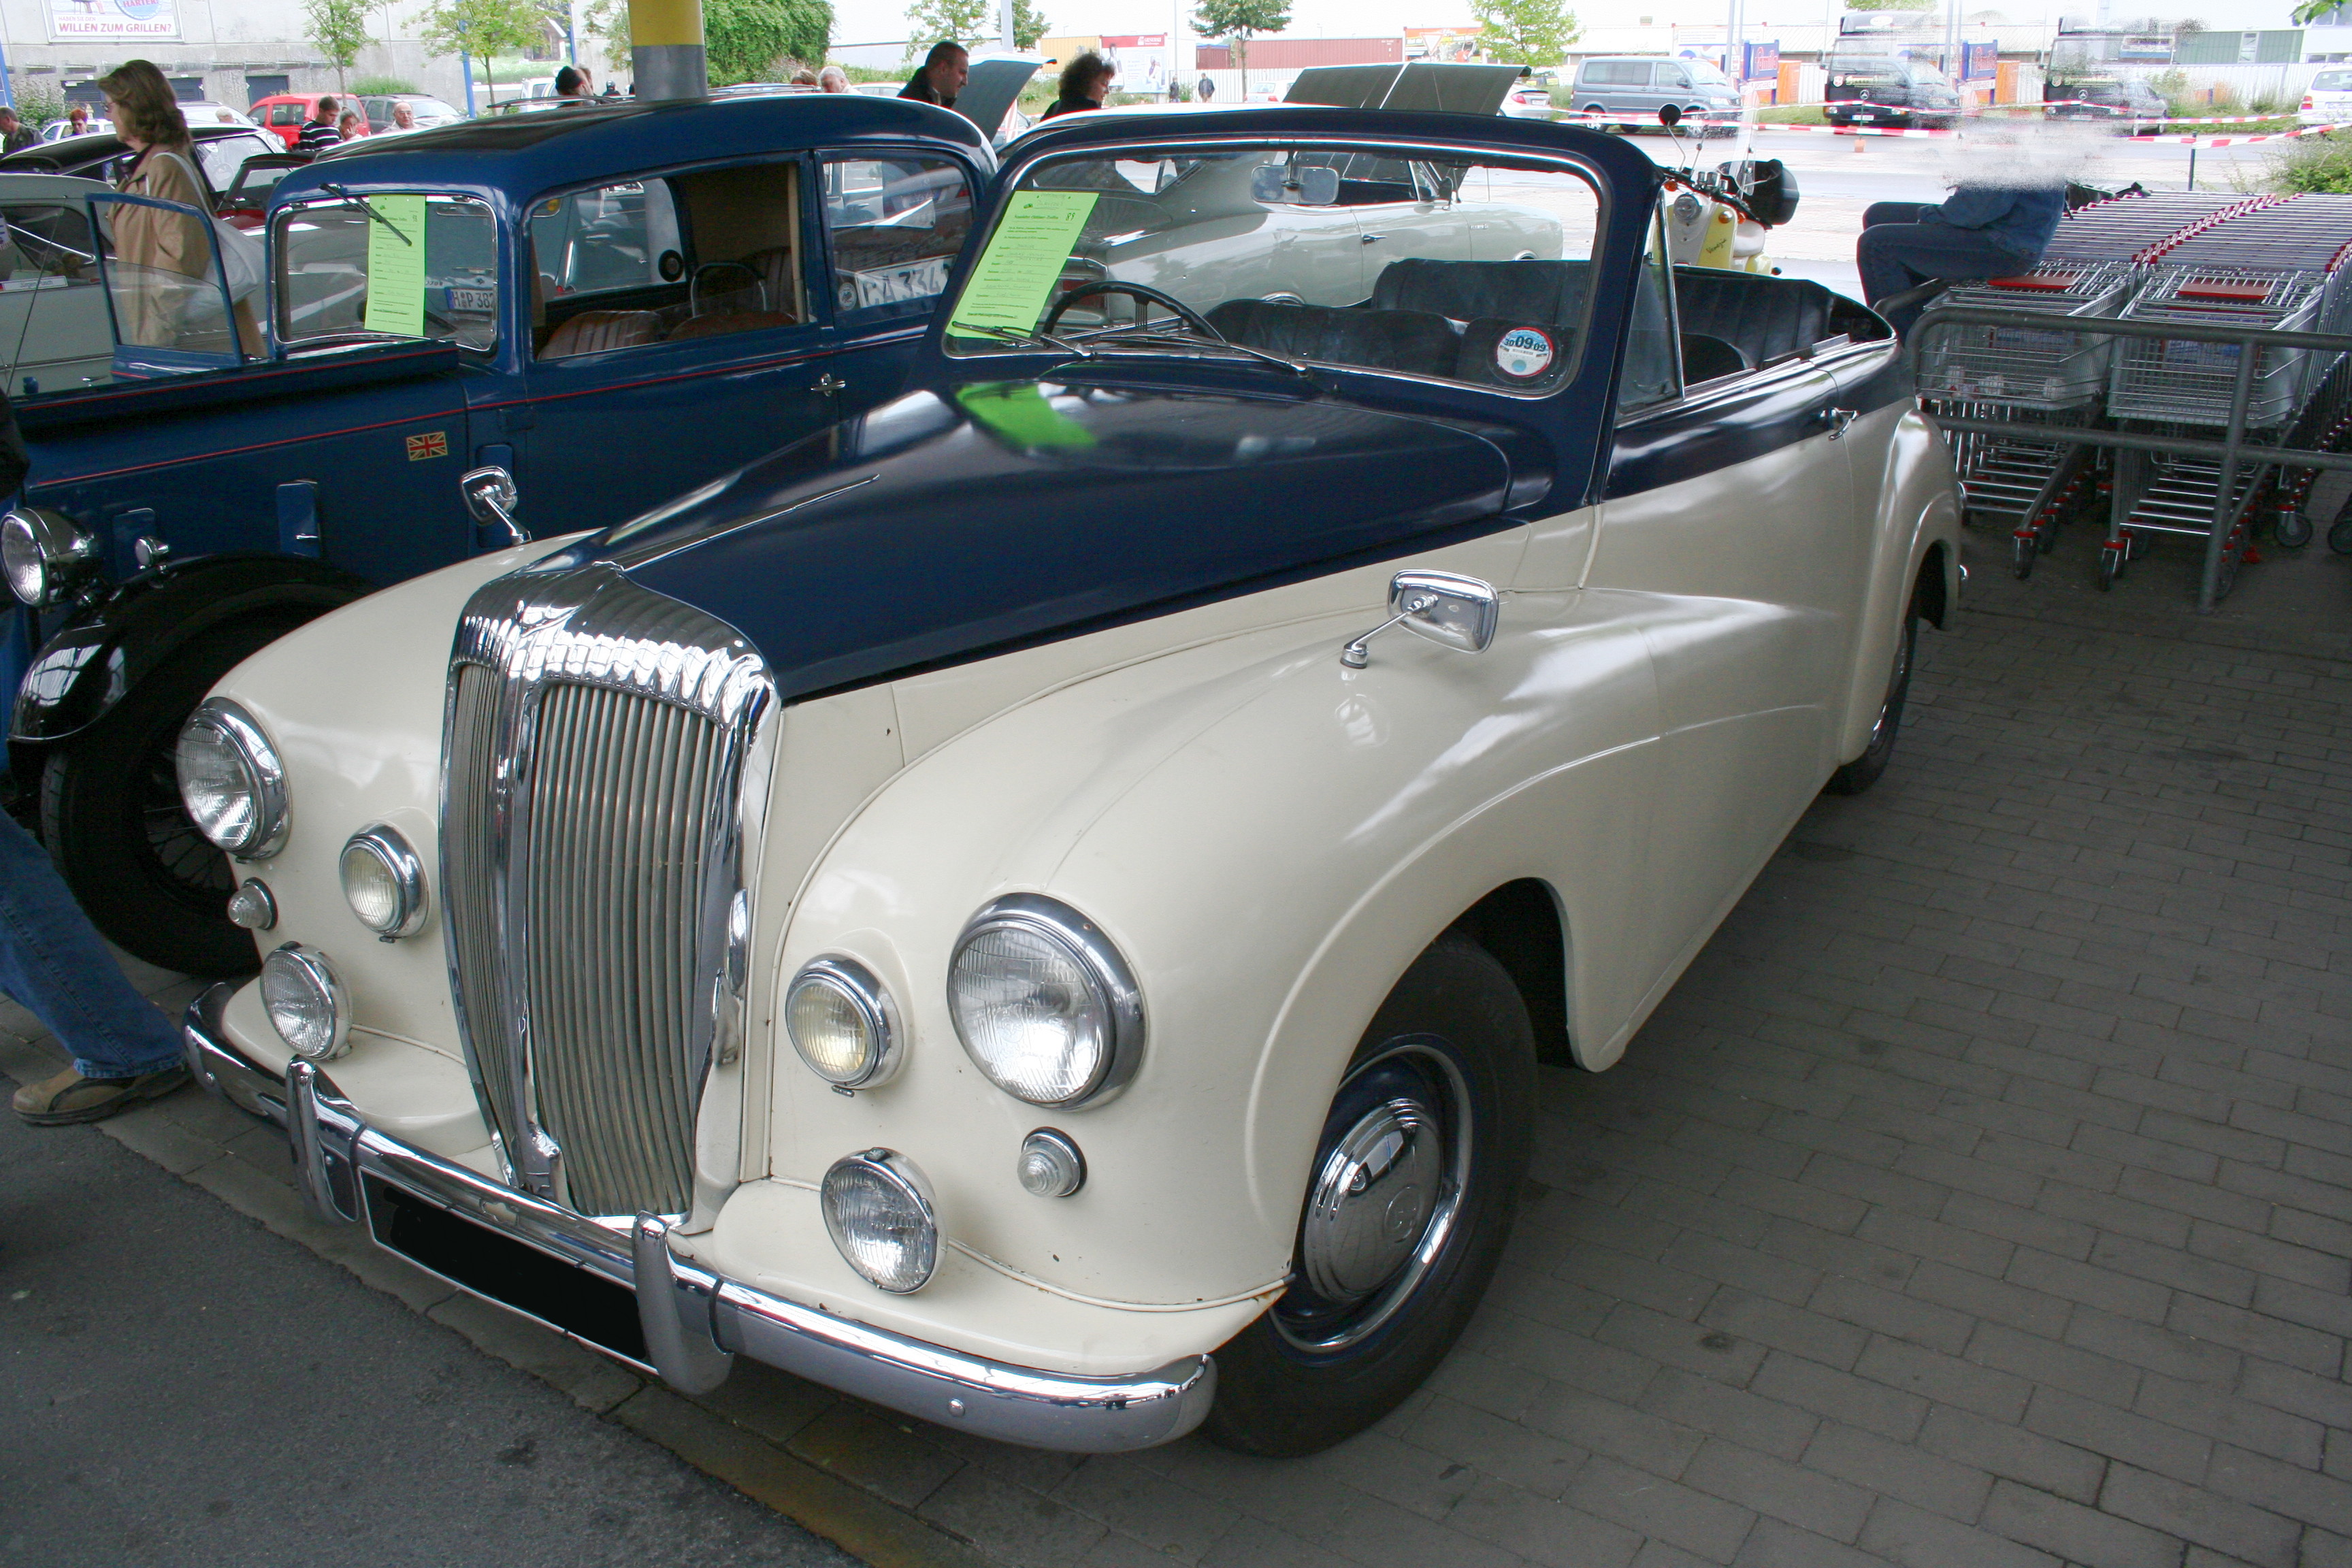 Daimler Conquest Century Convertible (1955) | Flickr - Photo Sharing!